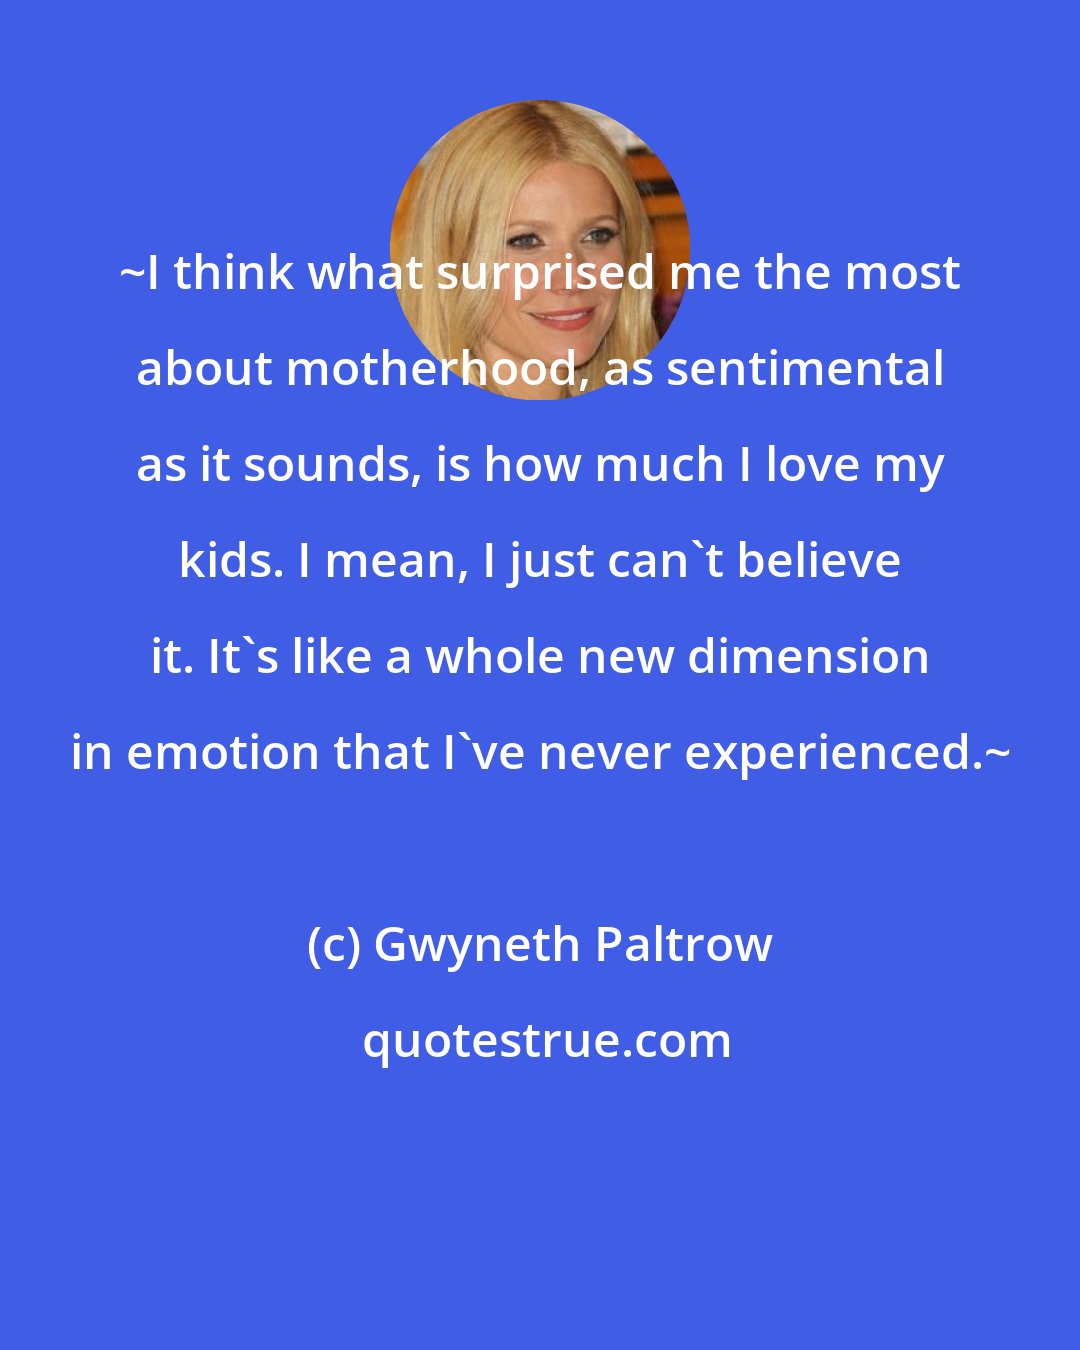 Gwyneth Paltrow: ~I think what surprised me the most about motherhood, as sentimental as it sounds, is how much I love my kids. I mean, I just can't believe it. It's like a whole new dimension in emotion that I've never experienced.~